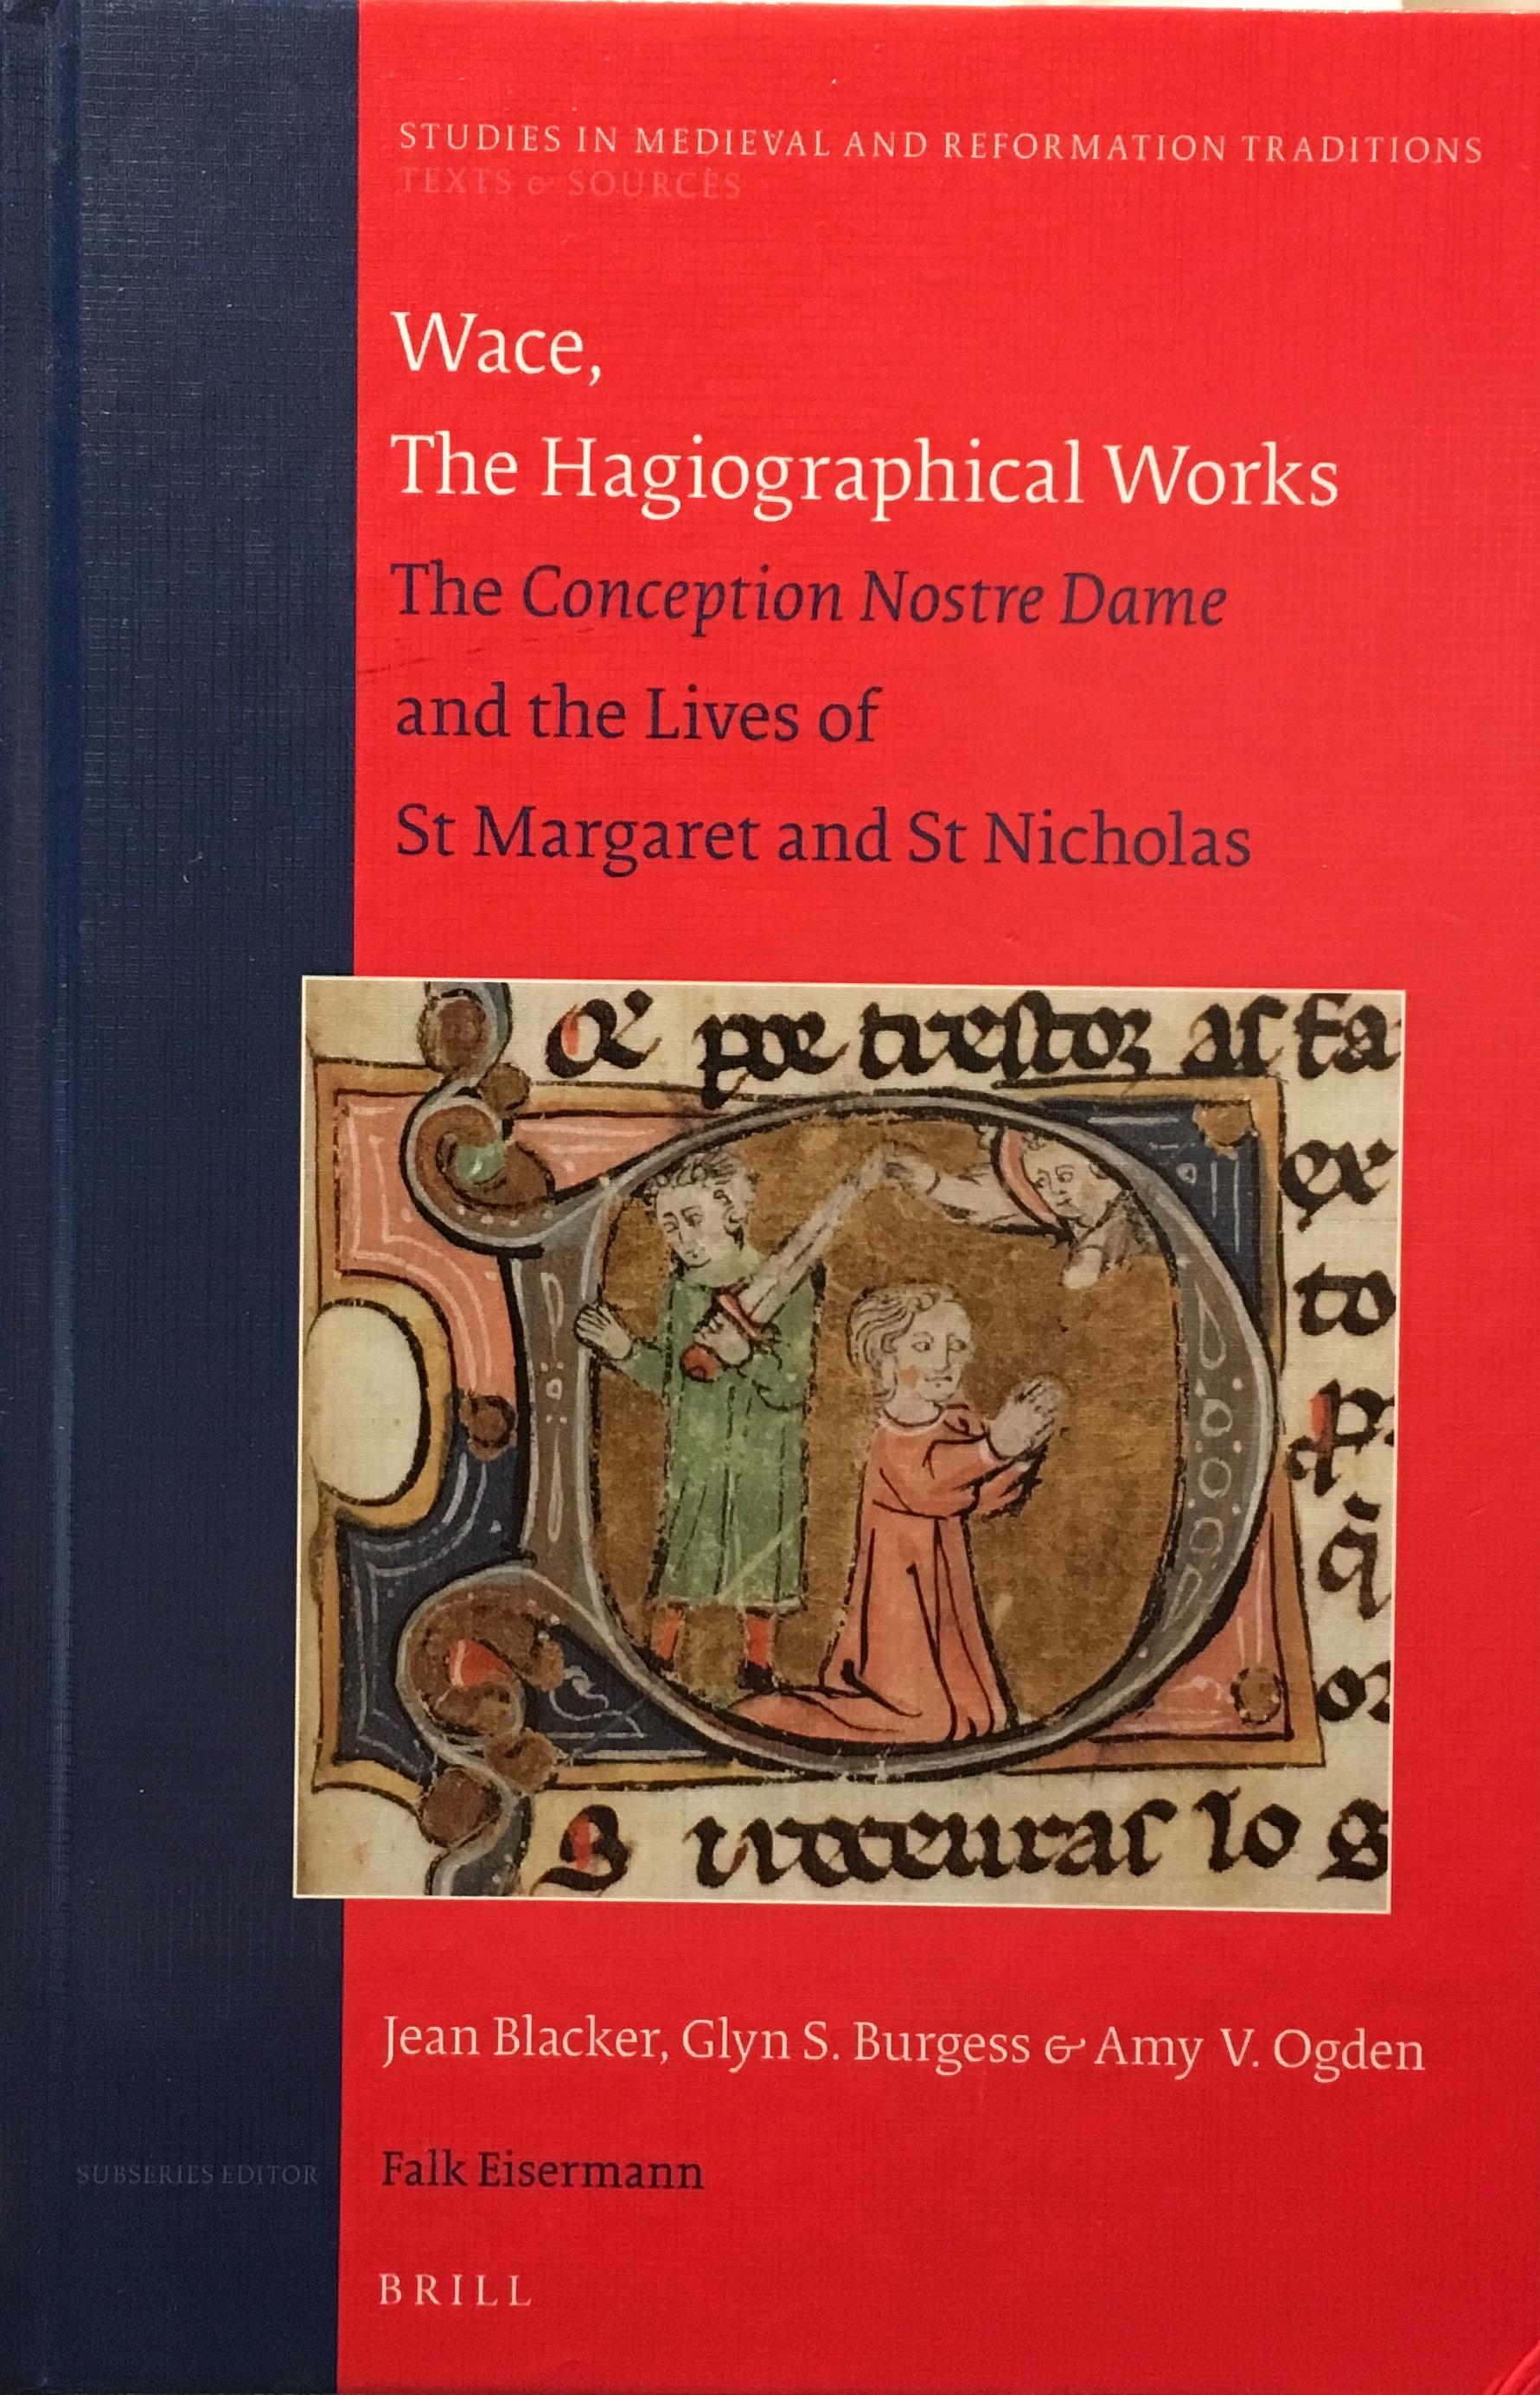 Wace, The Hagiographical Works